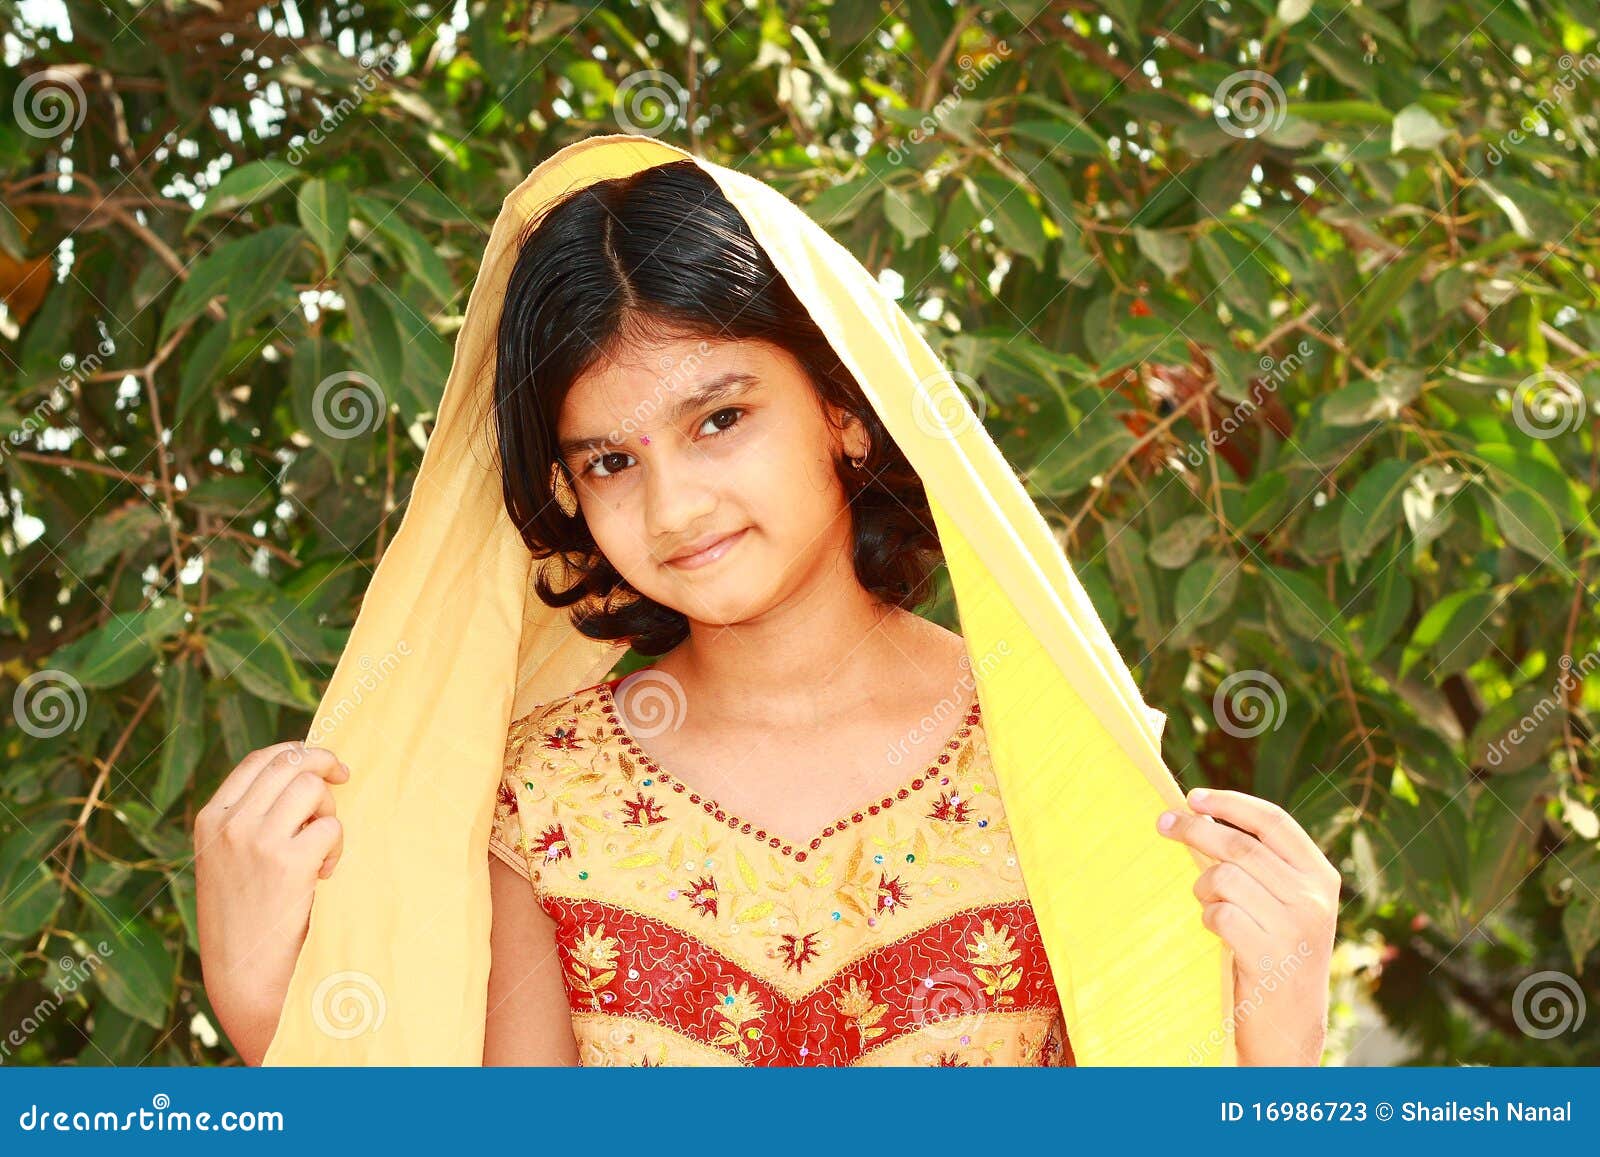 246 Rajasthani Village Girl Stock Photos - Free & Royalty-Free Stock Photos  from Dreamstime